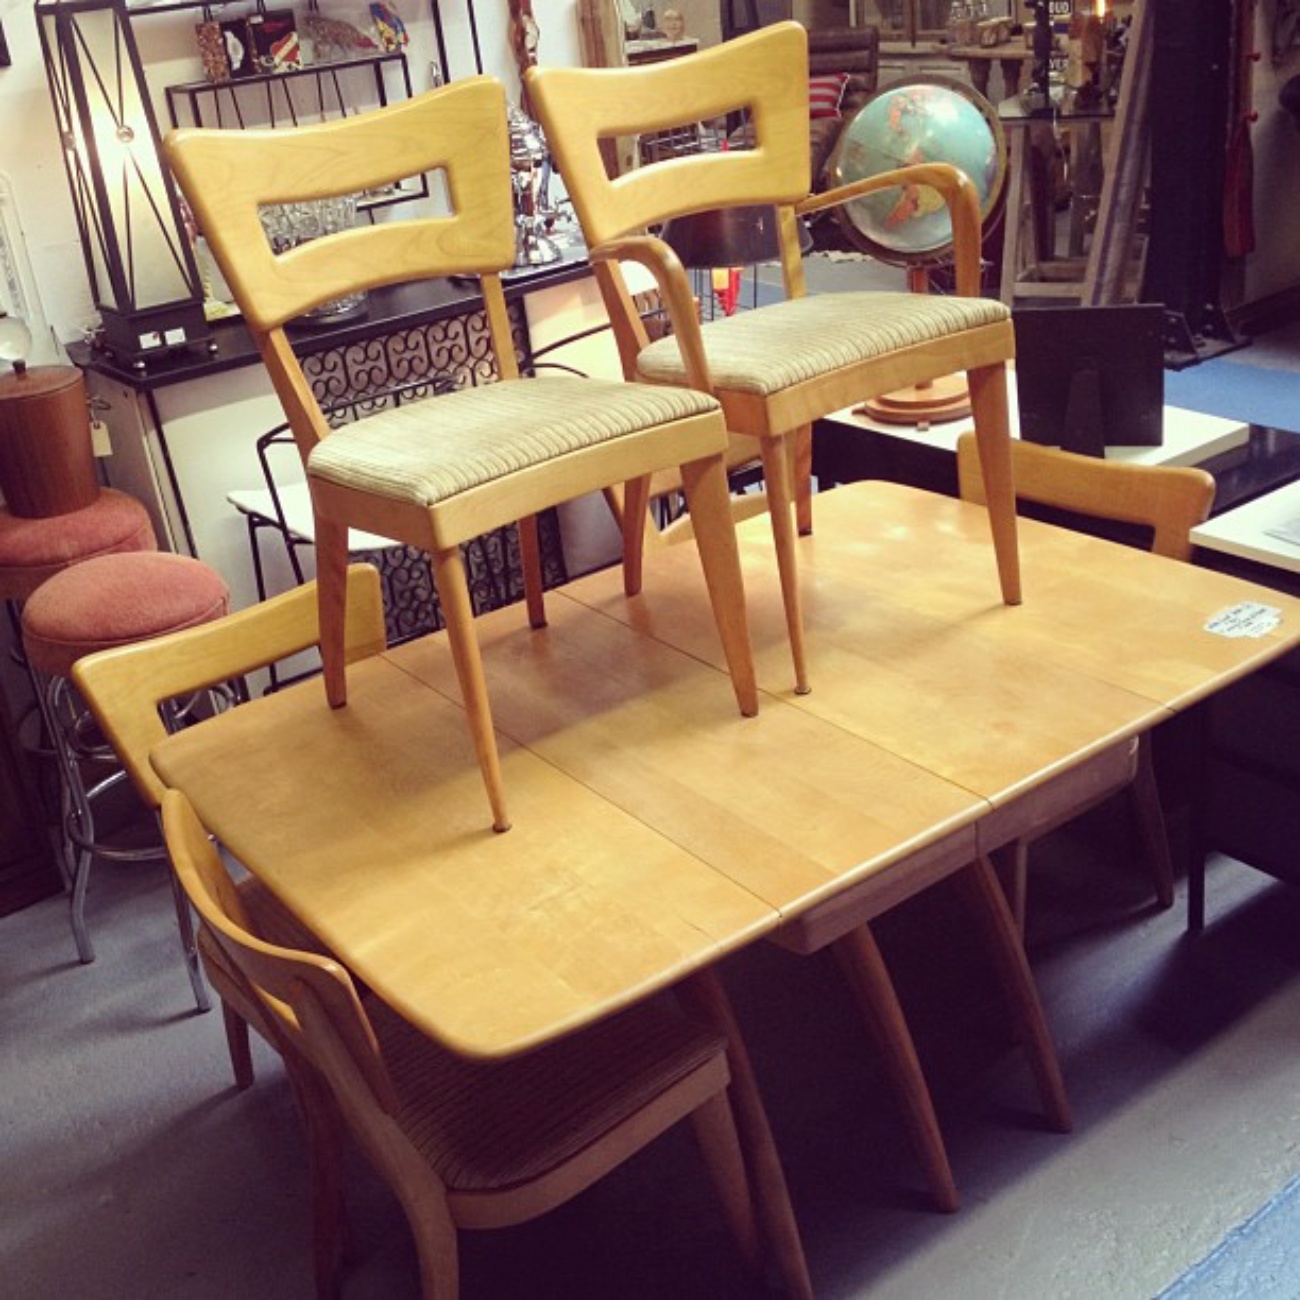 Heywood Wakefield table and chairs